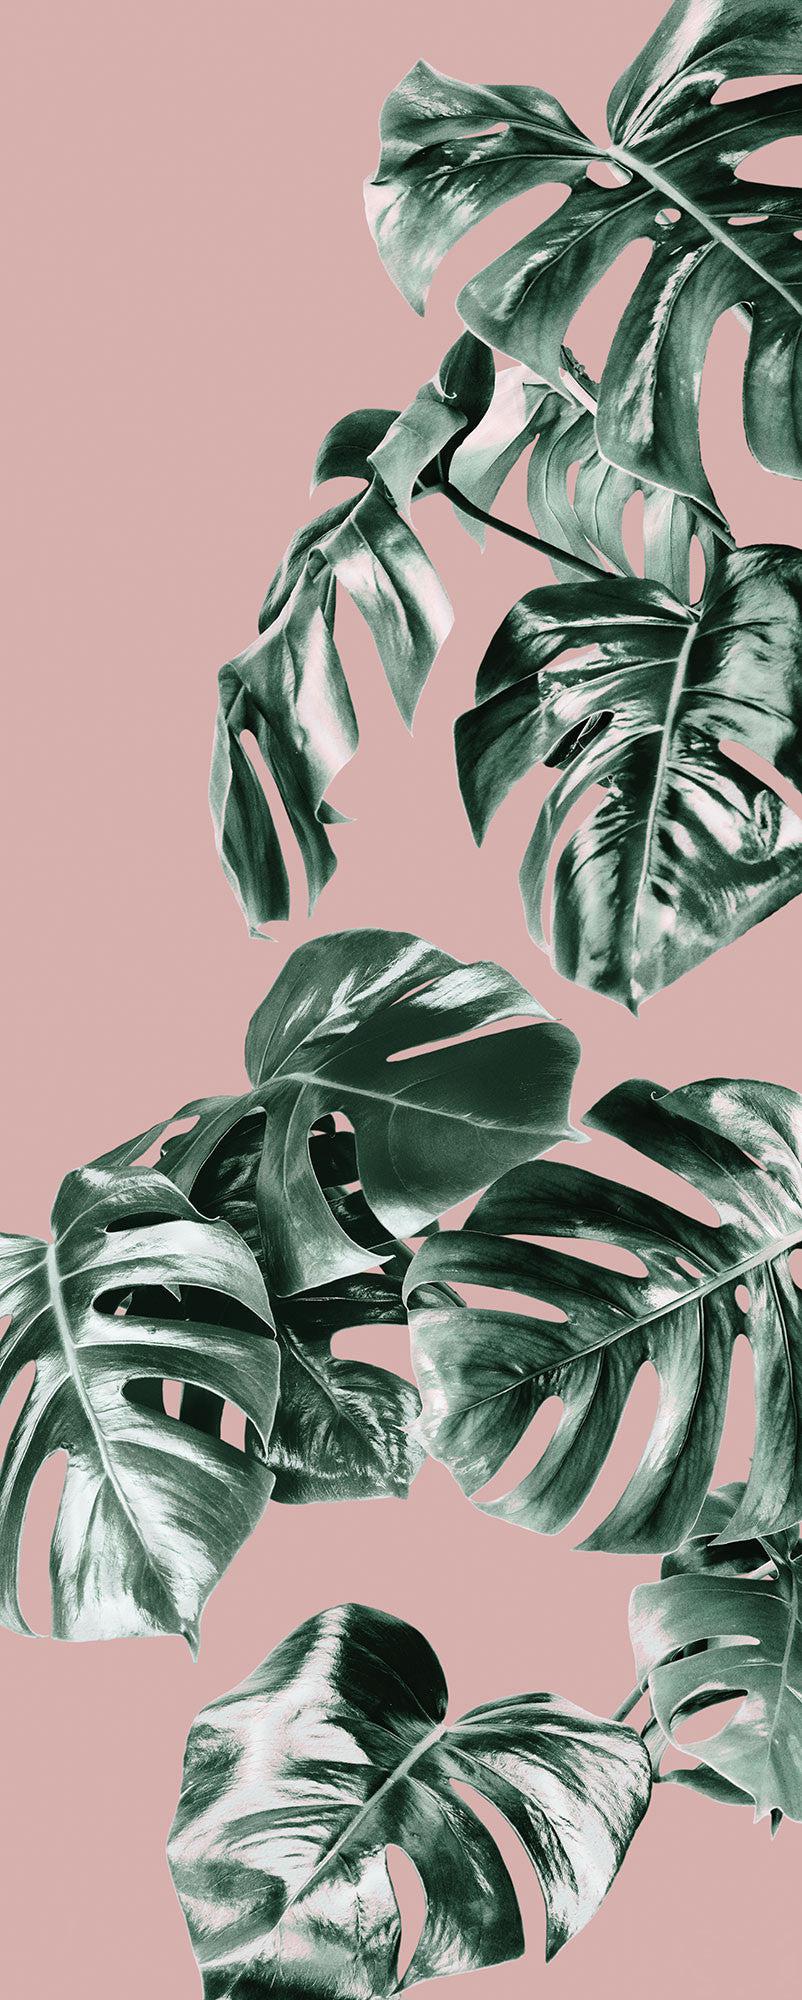 IPhone wallpaper of monstera leaves on a pink background - Monstera